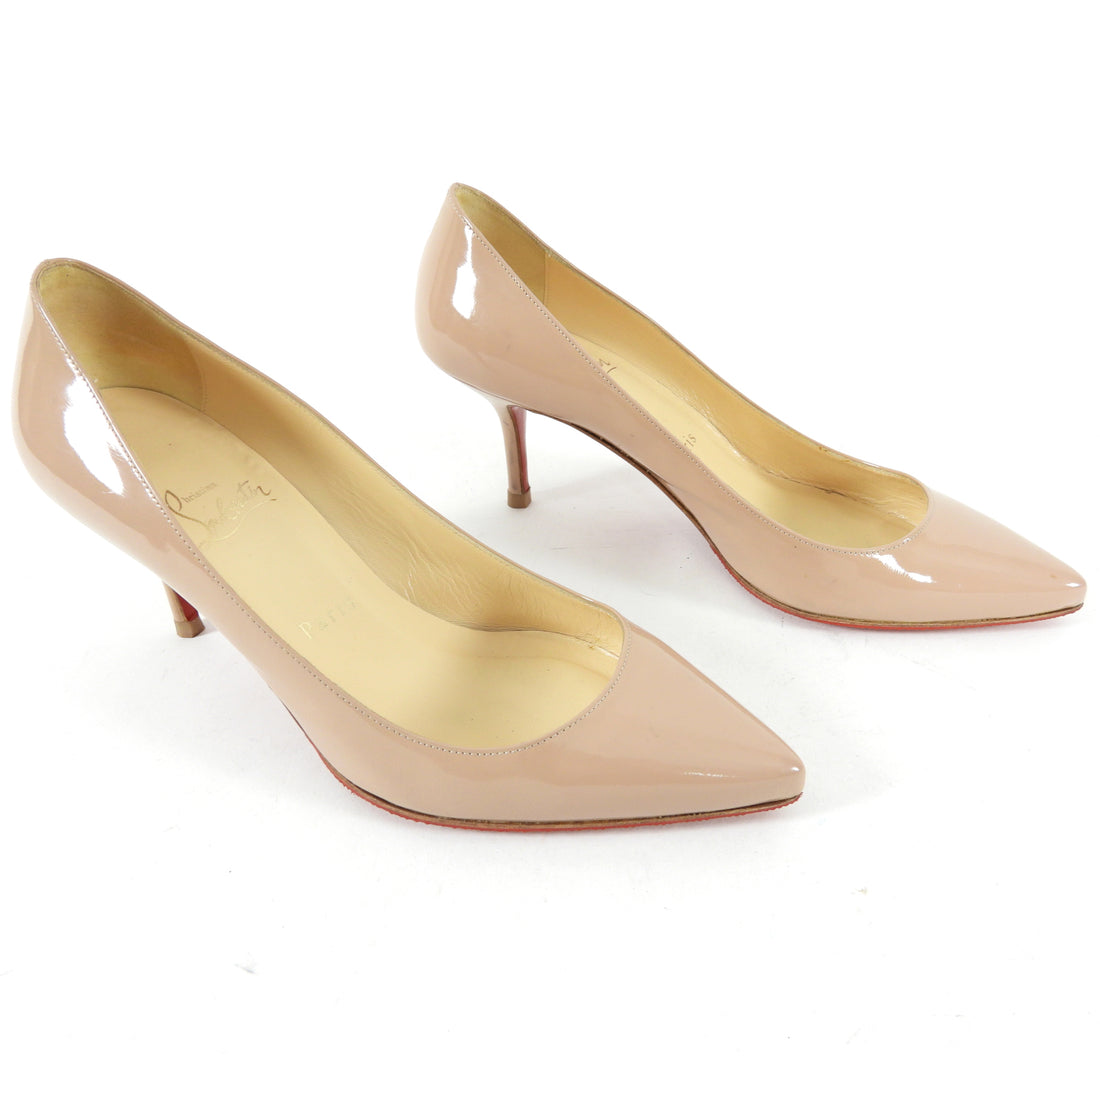 Christian Louboutin Nude Patent Leather Classic Pumps - 38